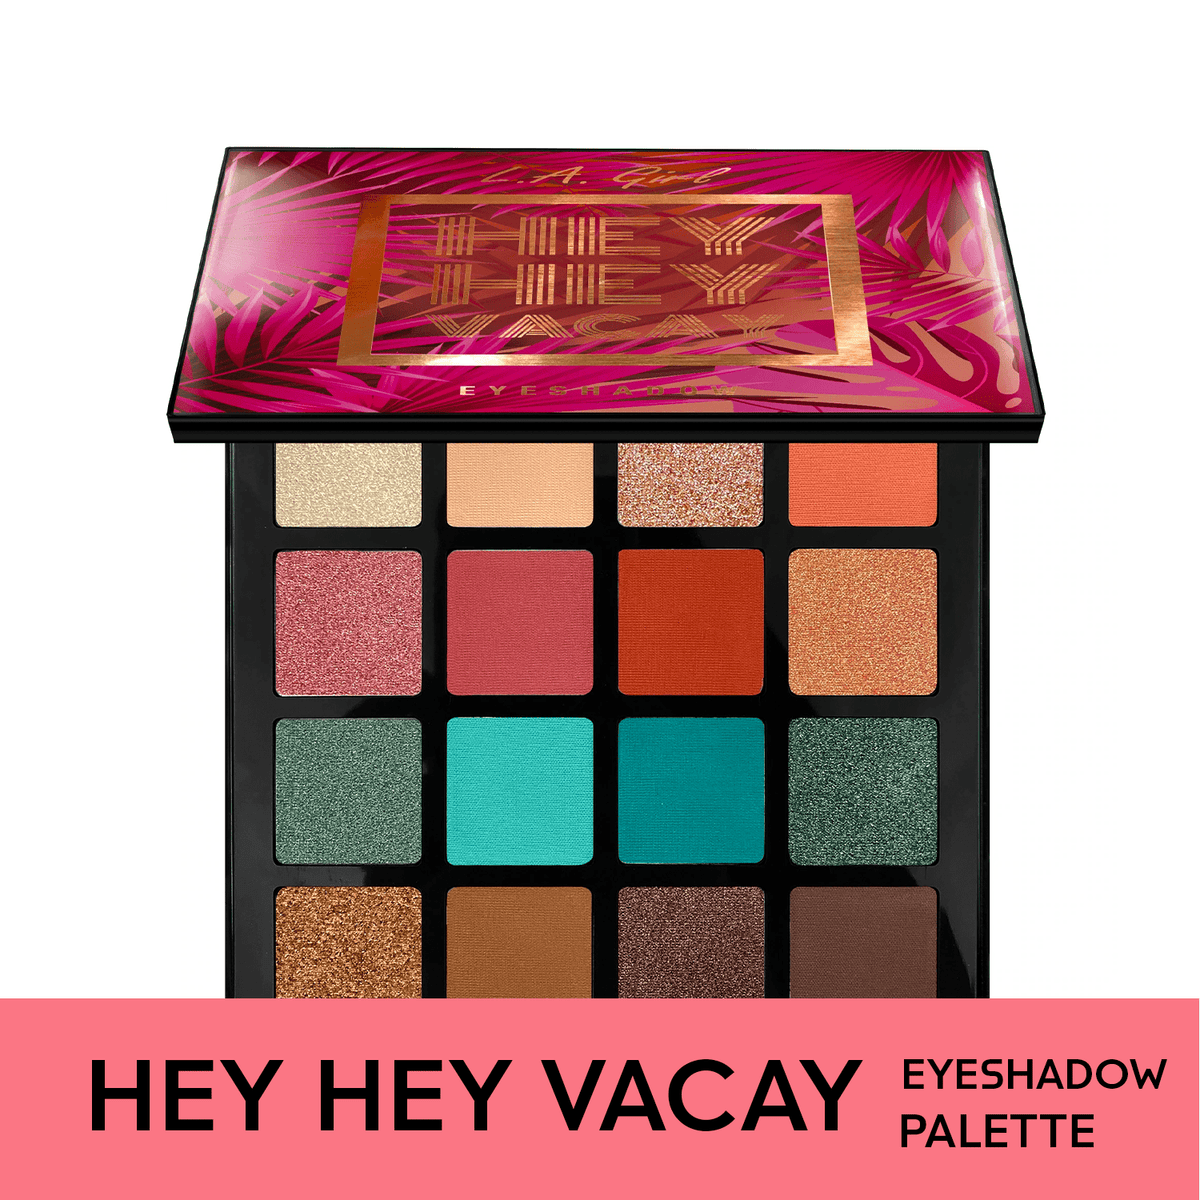 l-a-girl-hey-hey-vacay-eyeshadow-palette-16-colors